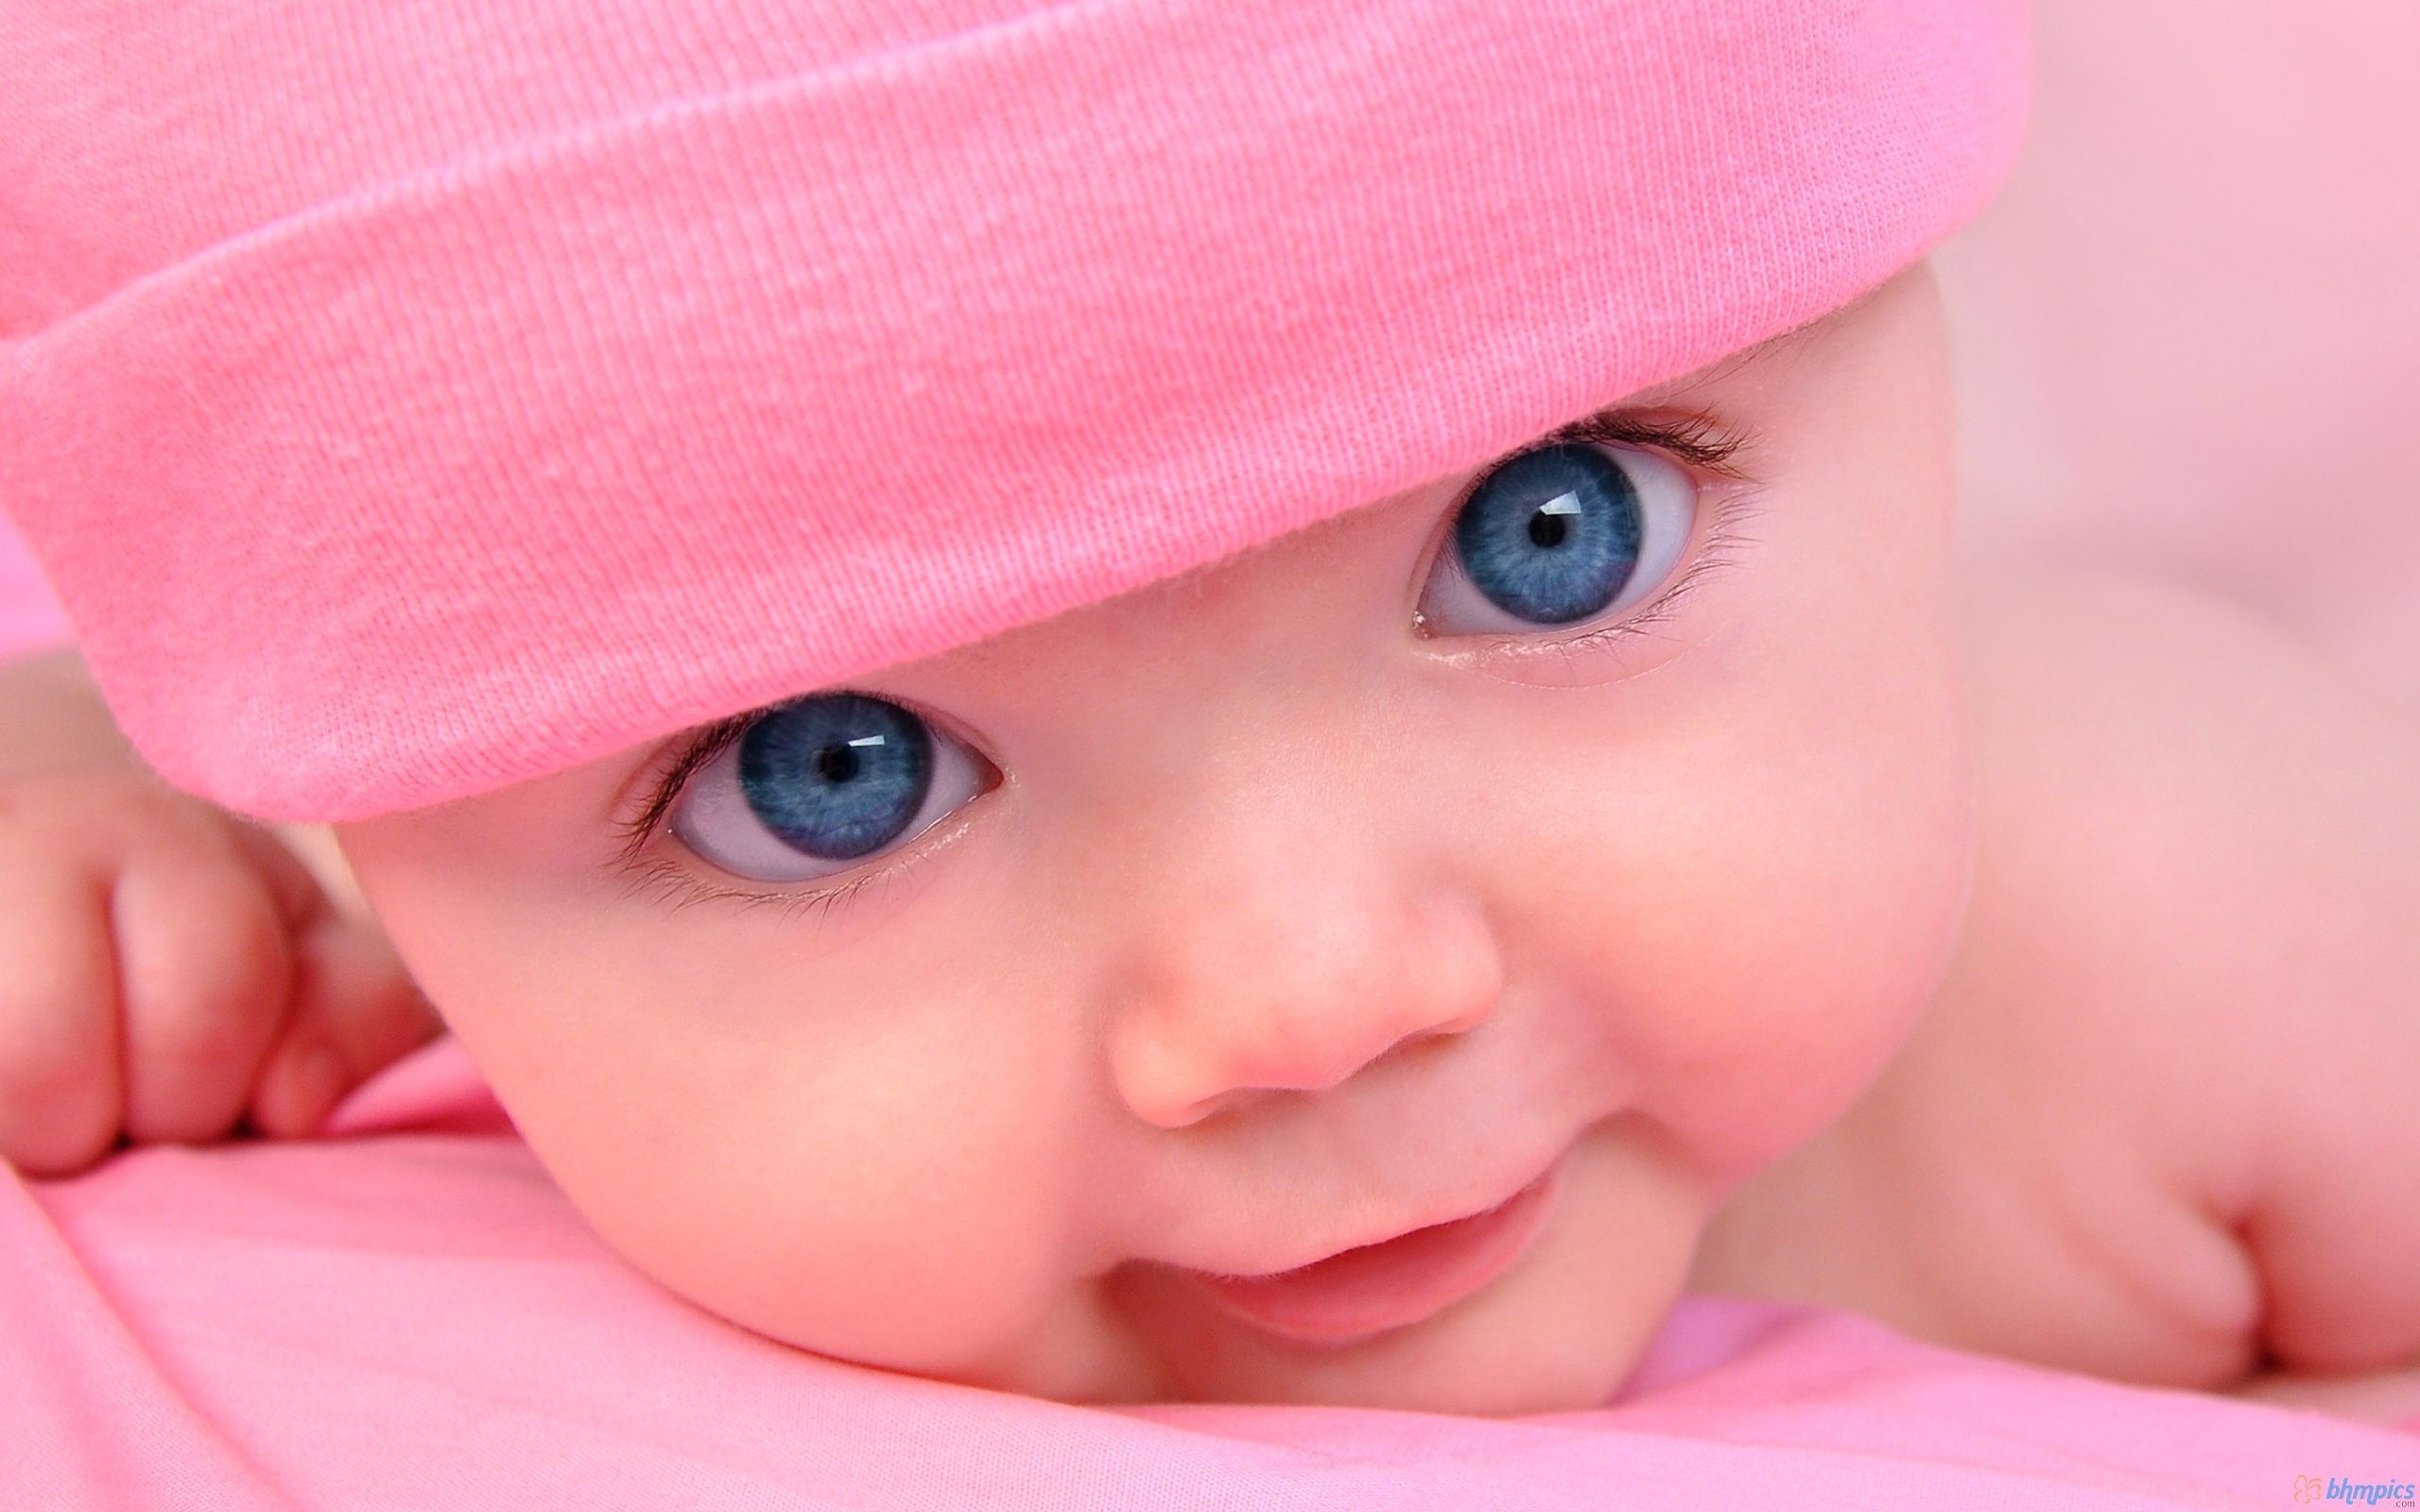 Cute Babies With Blue Eyes Wallpaper Download. Blue eyed baby, Little baby girl, Cute little baby